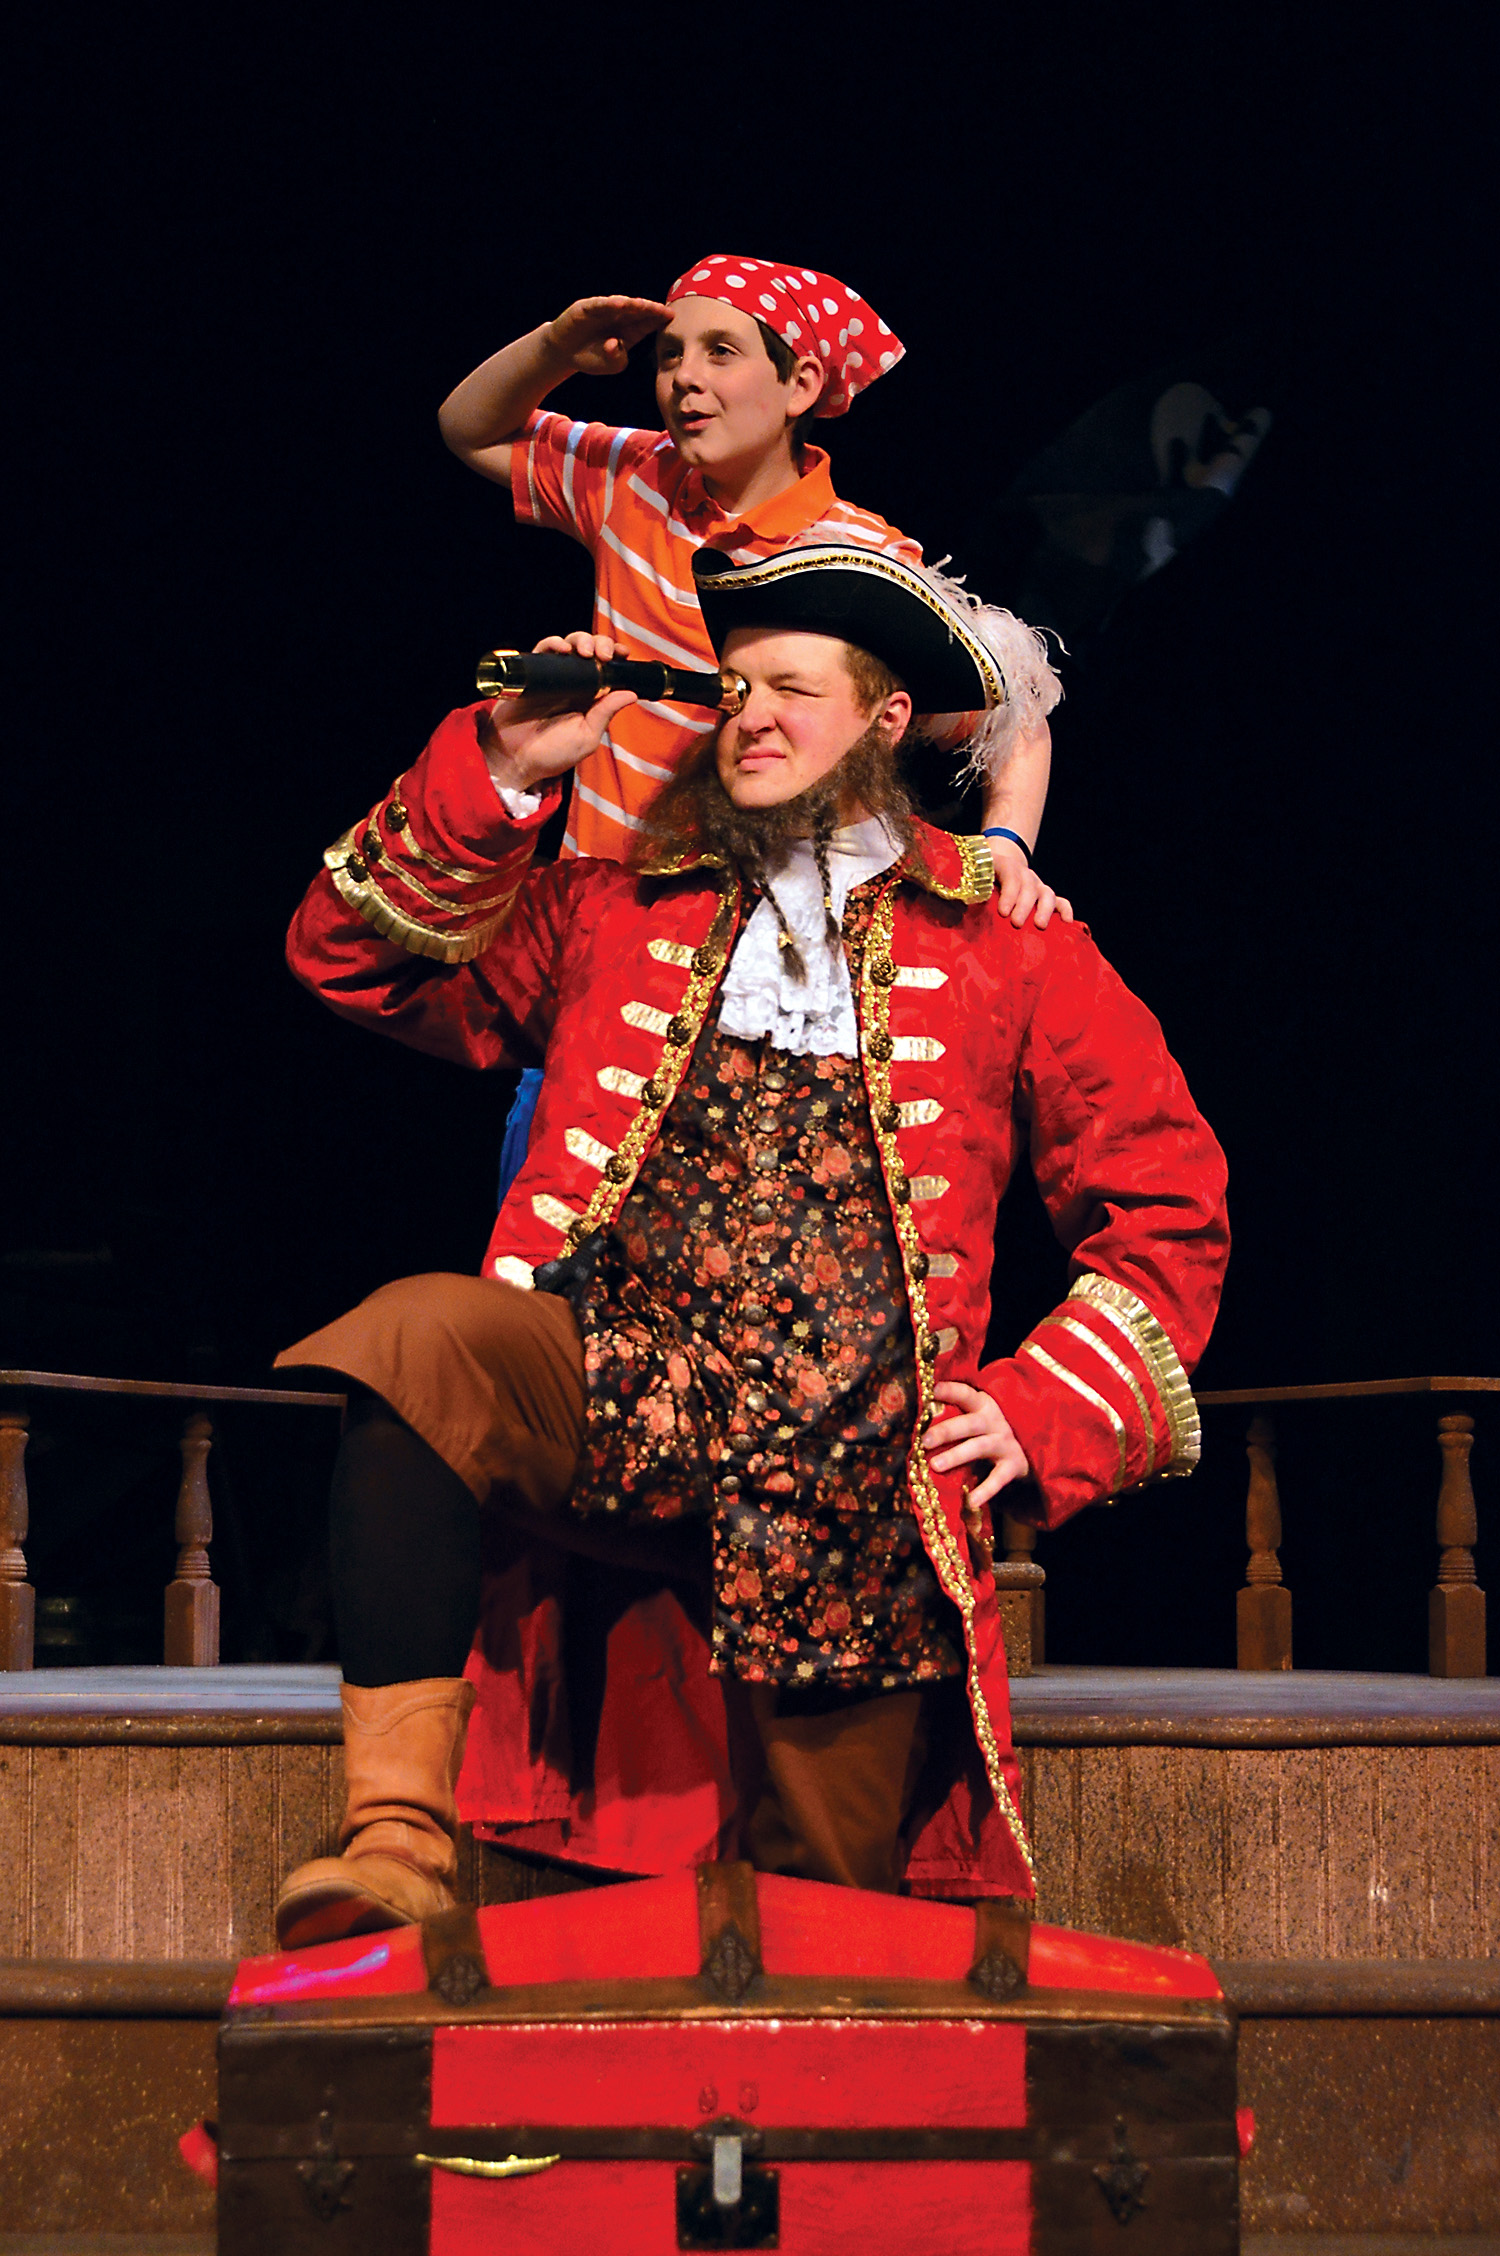 Beef & Boards Dinner Theatre will stage the children’s play “How I Became a Pirate” on Fridays and Saturdays through March 15. (Submitted photo)